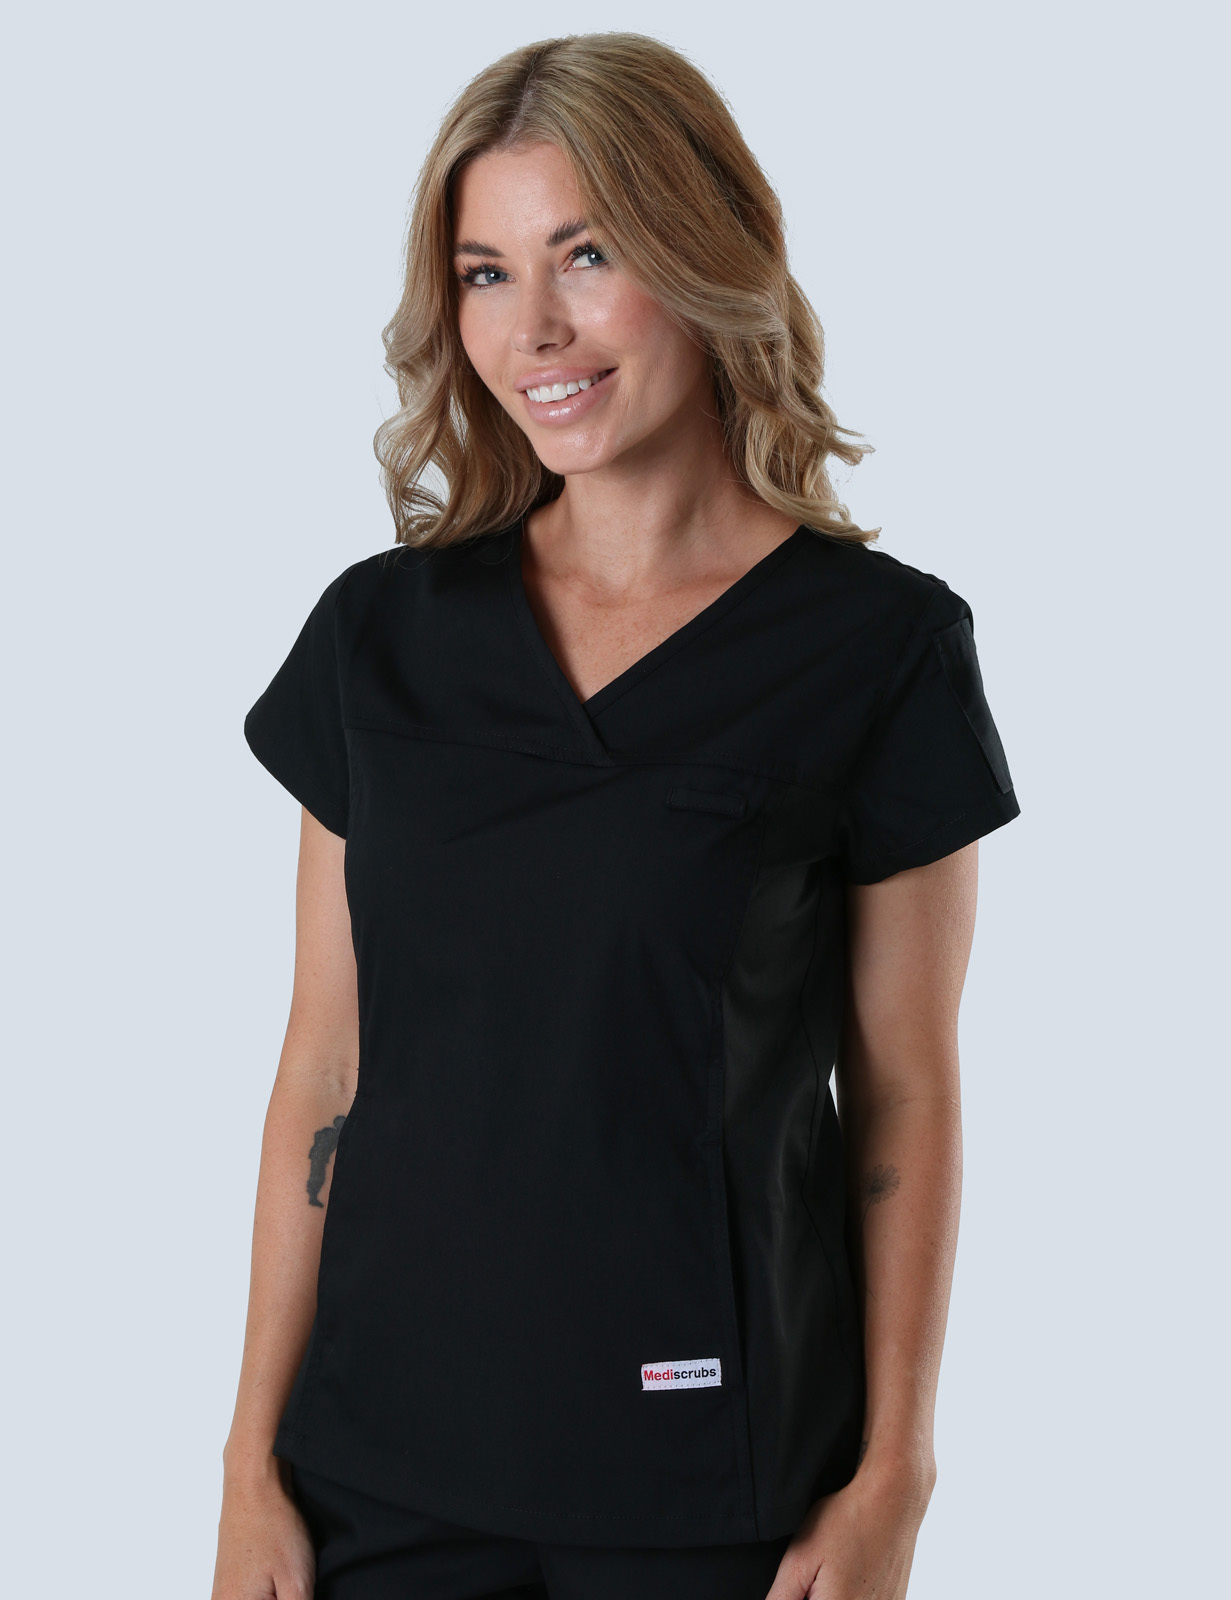 Redcliffe Hospital - Medical/Stroke Ward (Women's Fit Spandex Scrub Top and Cargo Pants in Black incl Logos)